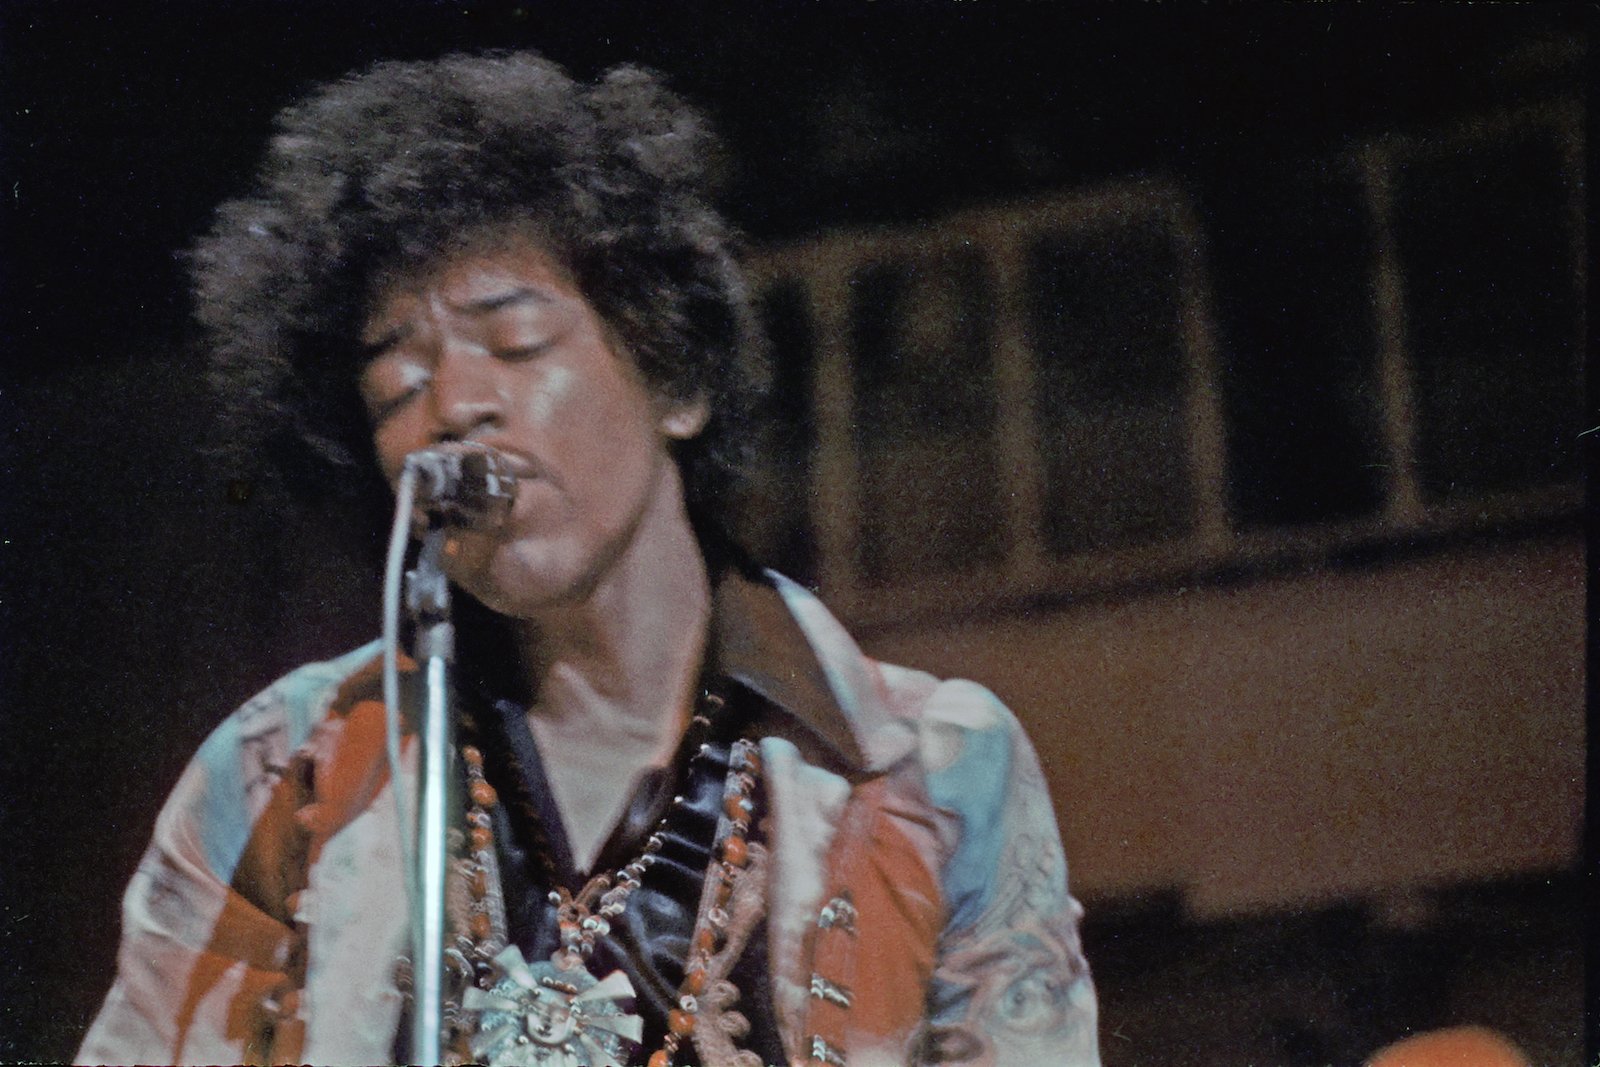 Jimi Hendrix, whose last album 'Electric Ladyland' was released in 1969, singing into a microphone